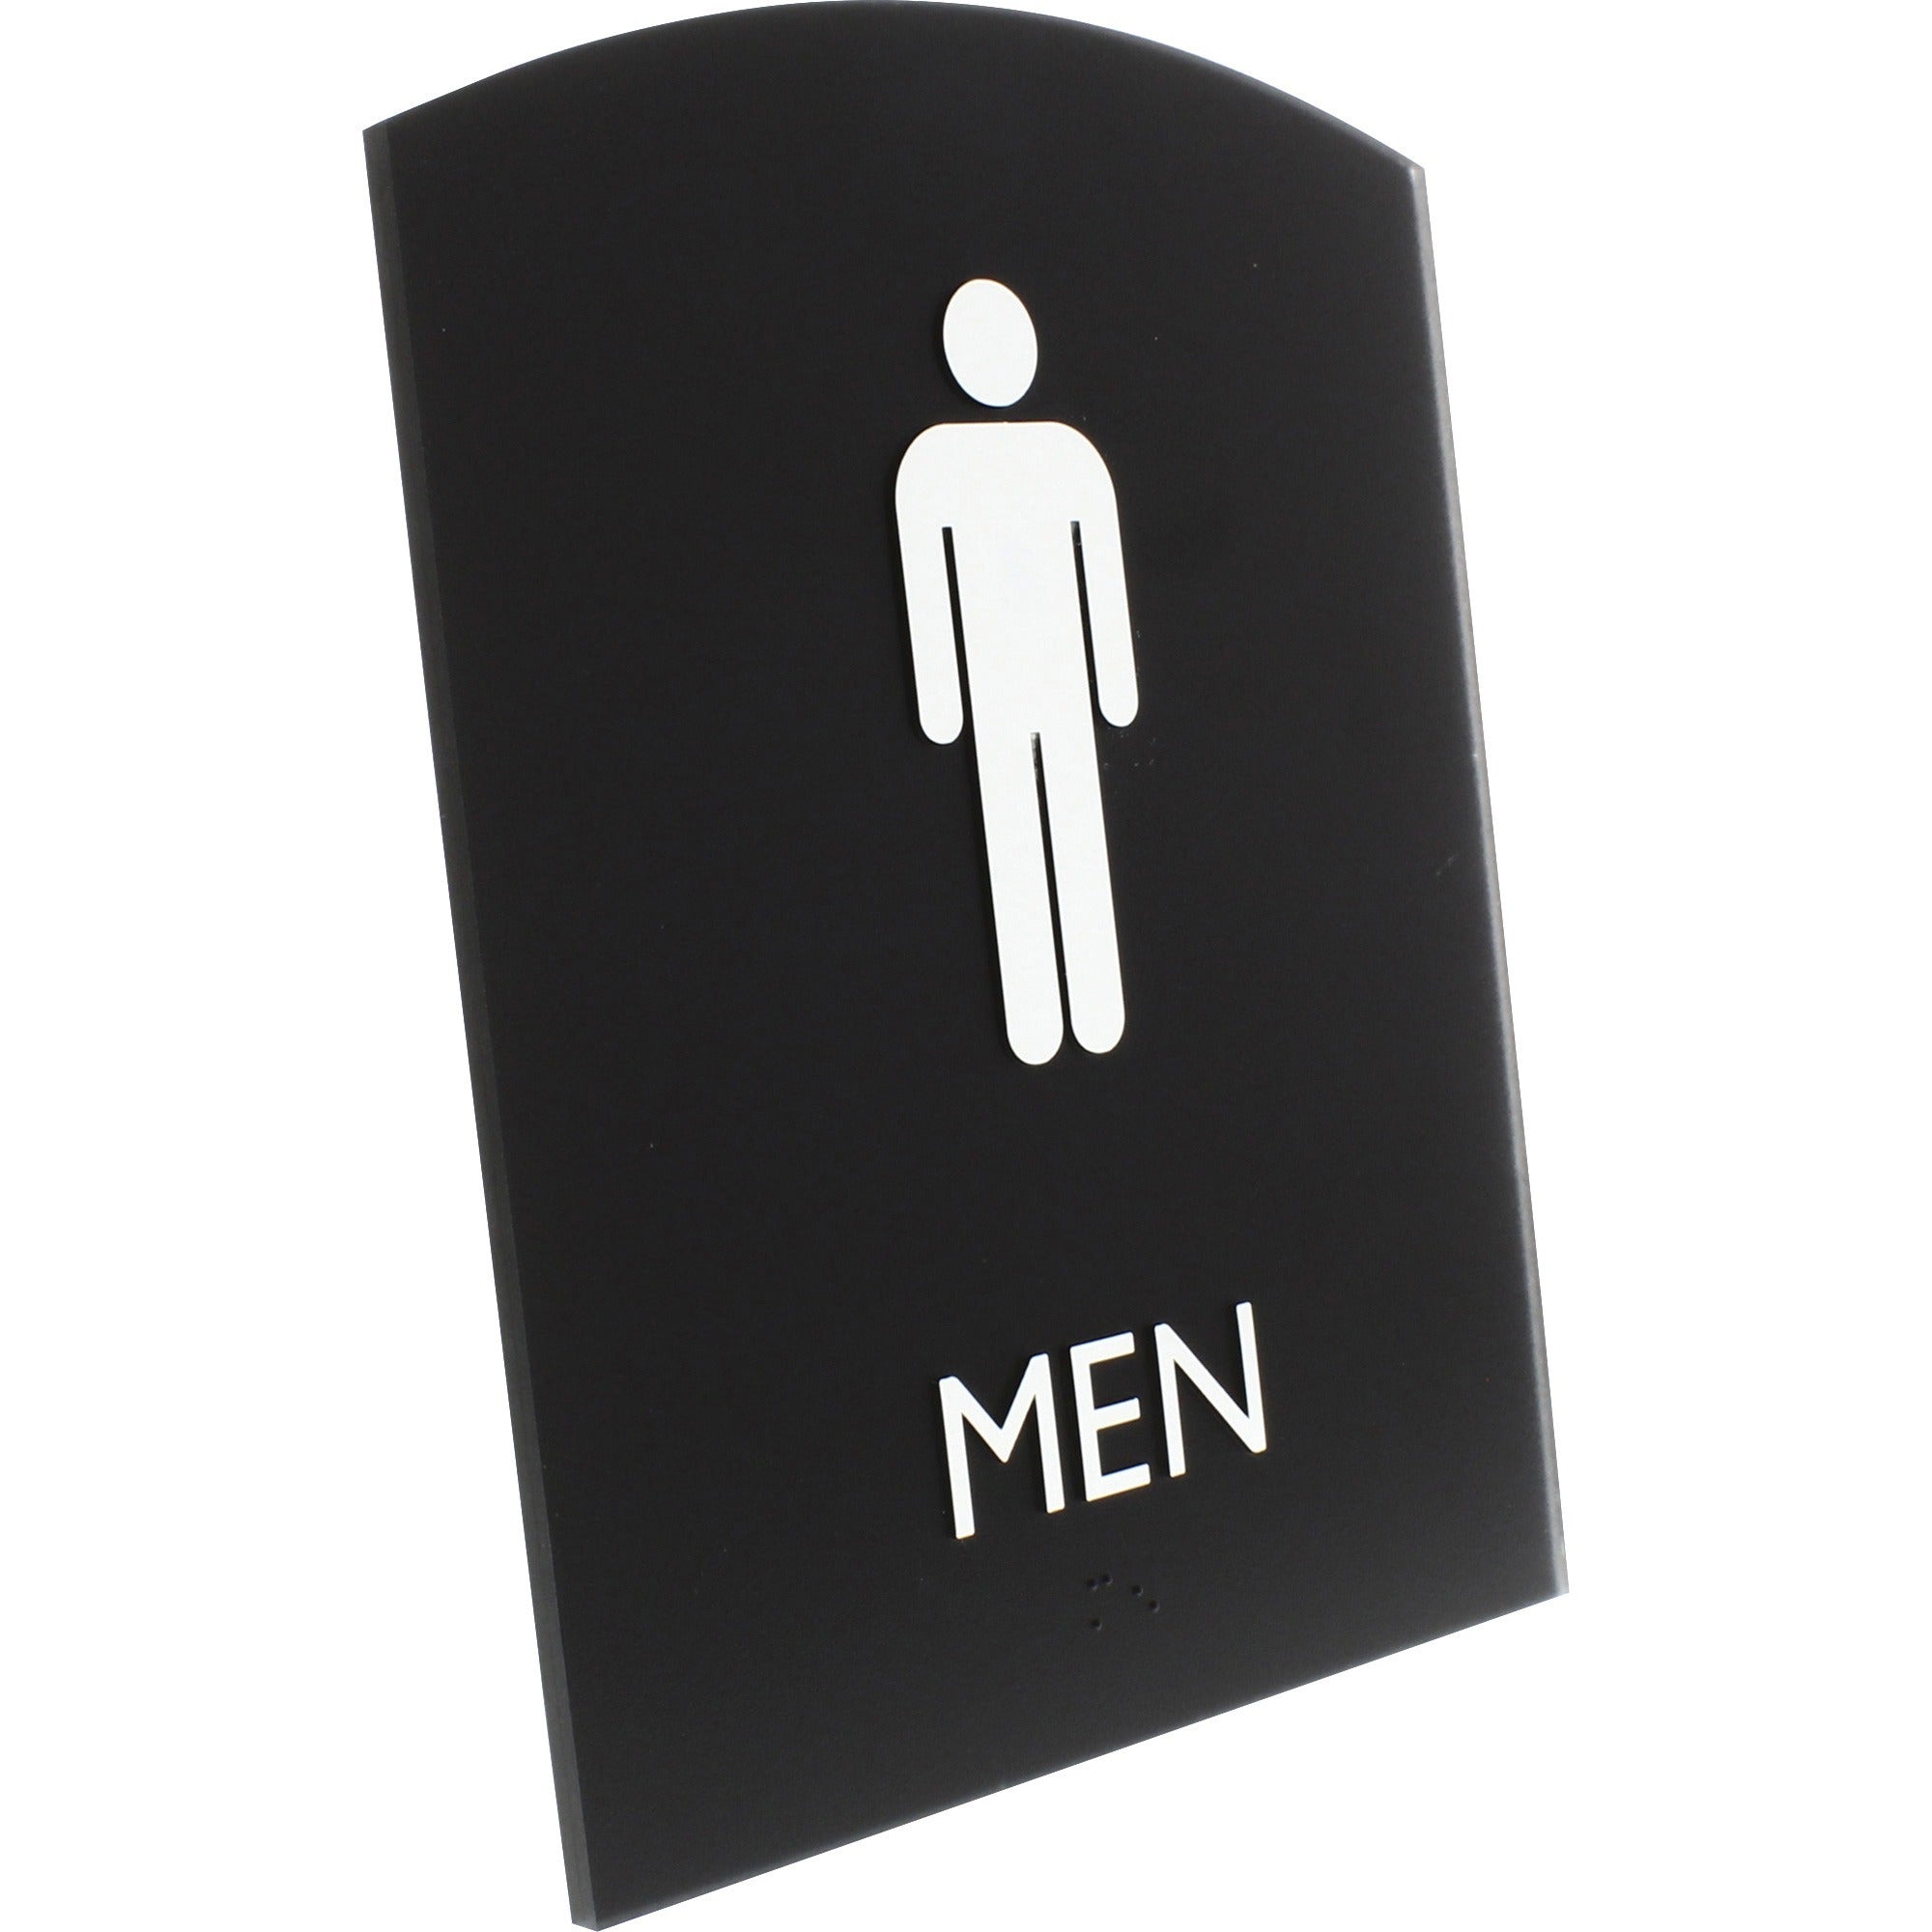 lorell-arched-mens-restroom-sign-1-each-men-print-message-68-width-x-85-height-rectangular-shape-surface-mountable-easy-readability-braille-plastic-black_llr02676 - 3